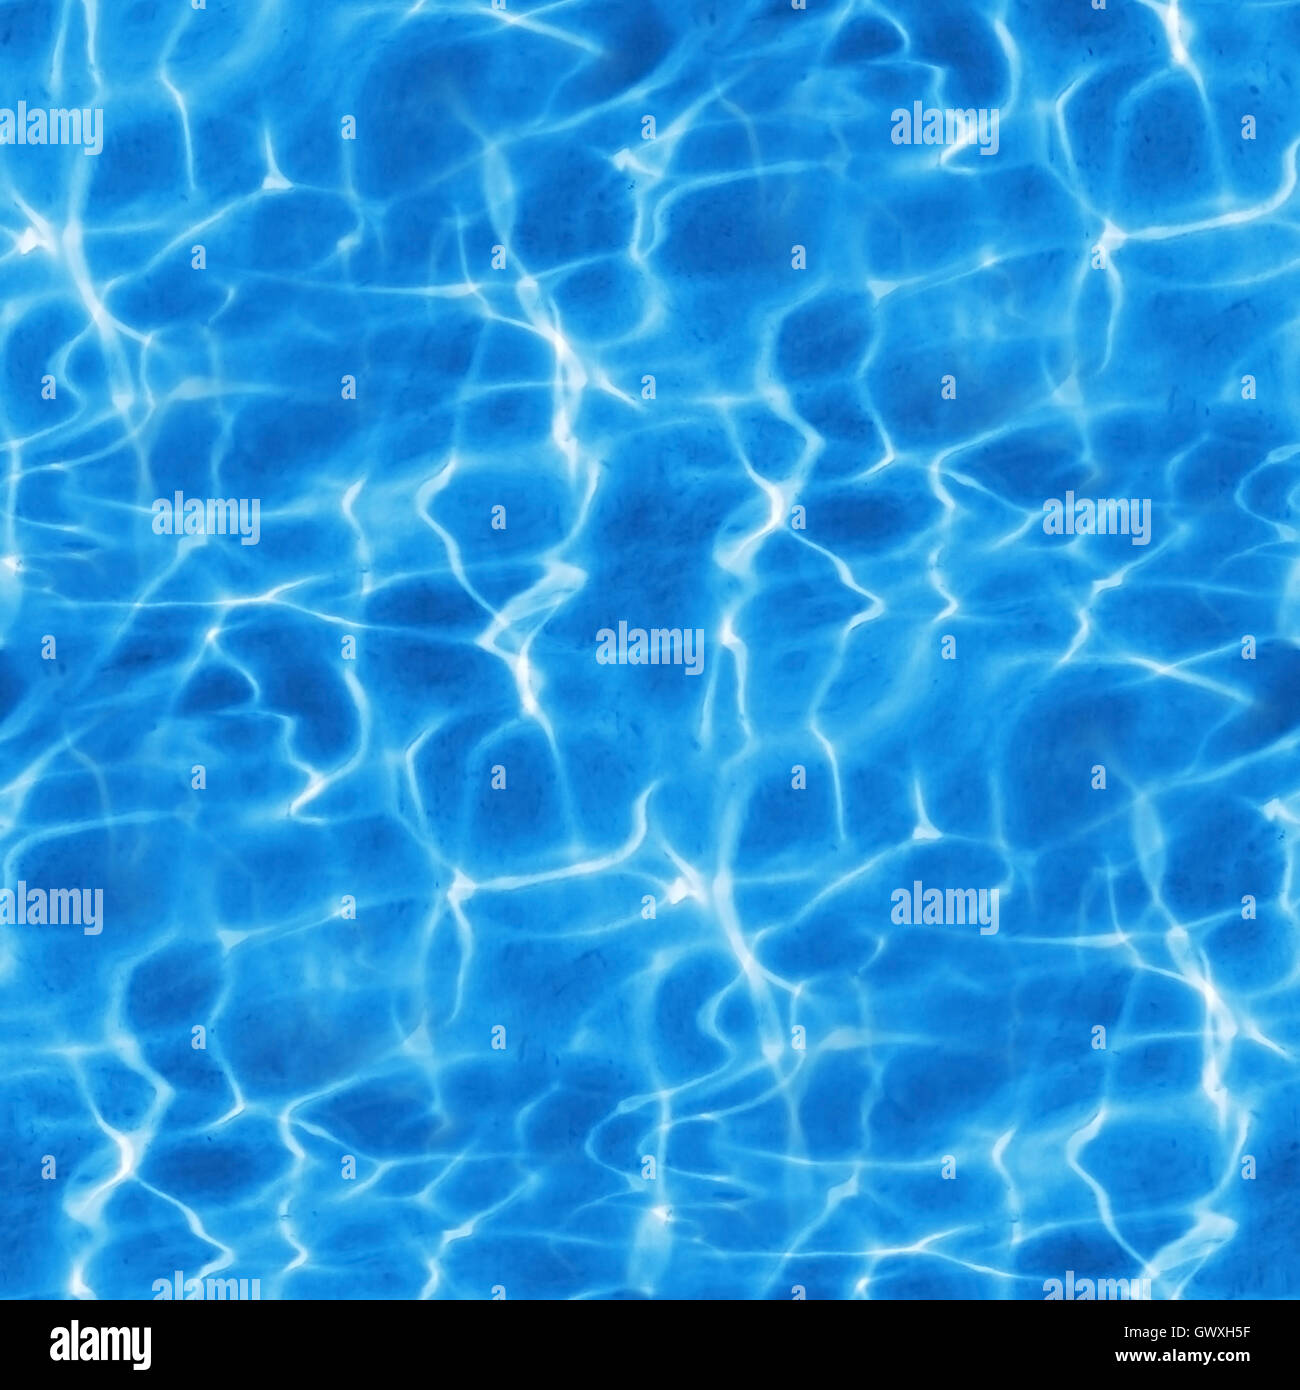 Surface water light reflections as a seamless background Stock Photo